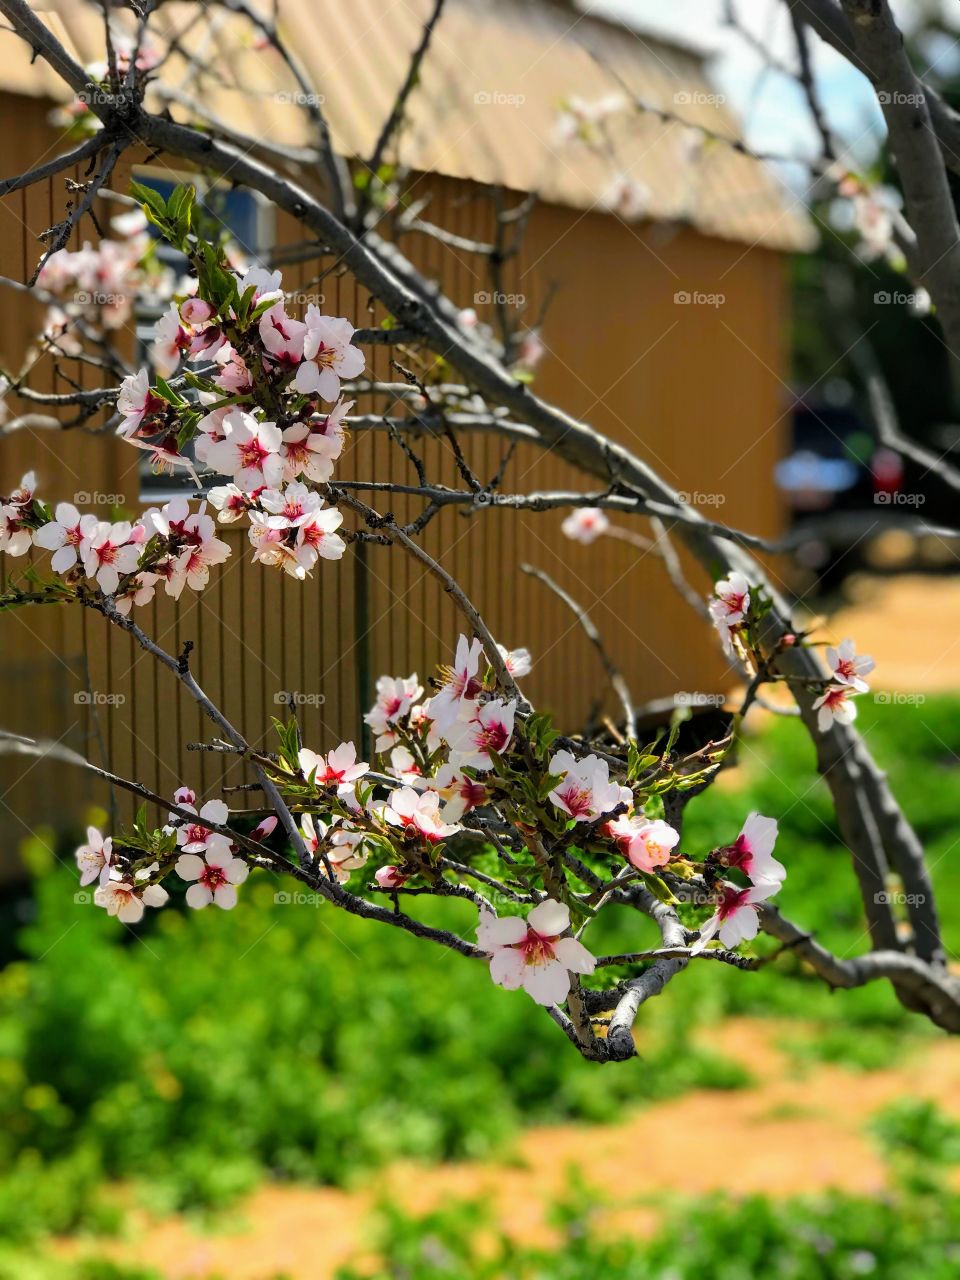 Here comes spring